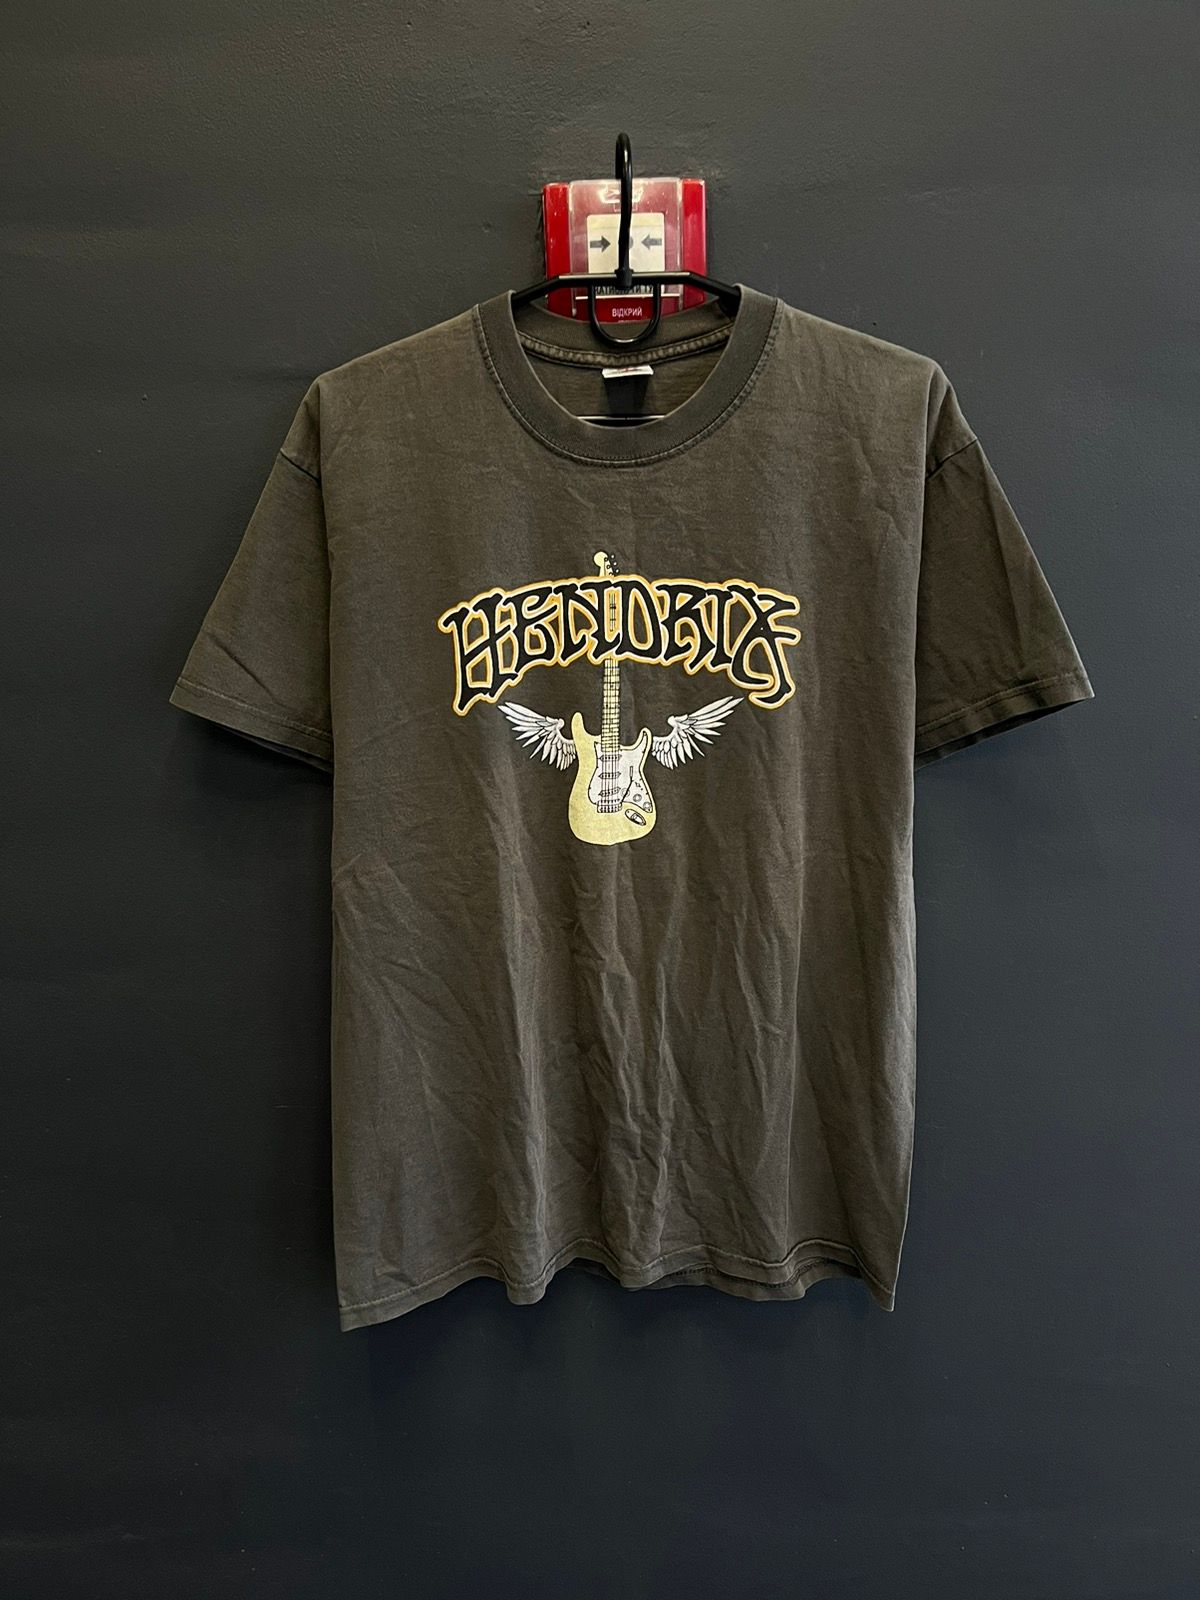 Pre-owned Band Tees X Rock T Shirt Vintage 00s Jimi Hendrix Guitar Wing Band Brown Tee T Shirt (size Xl)